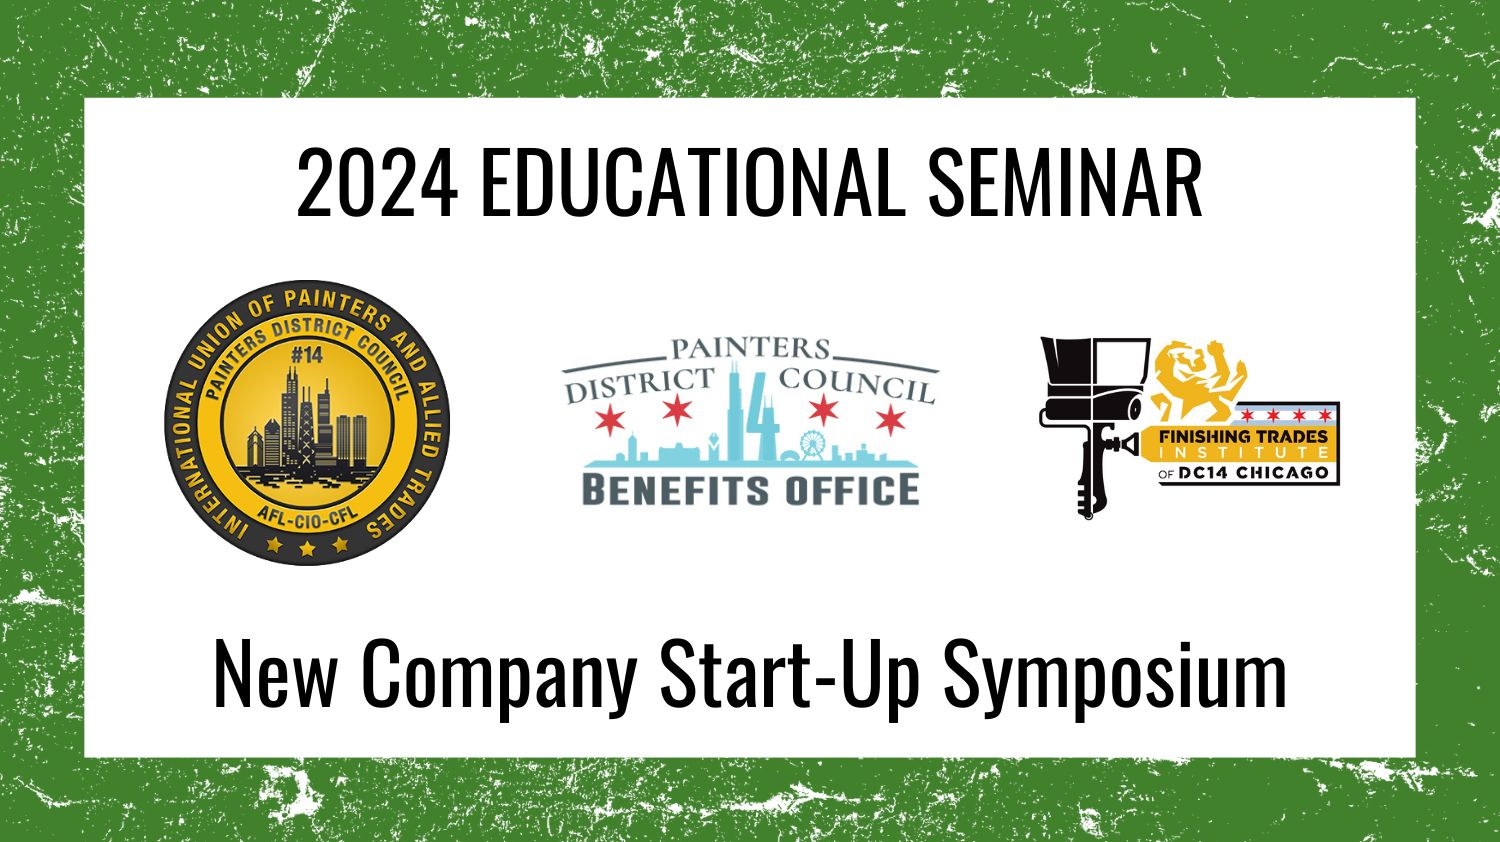 Coming this Fall: New Company Start-Up Symposium